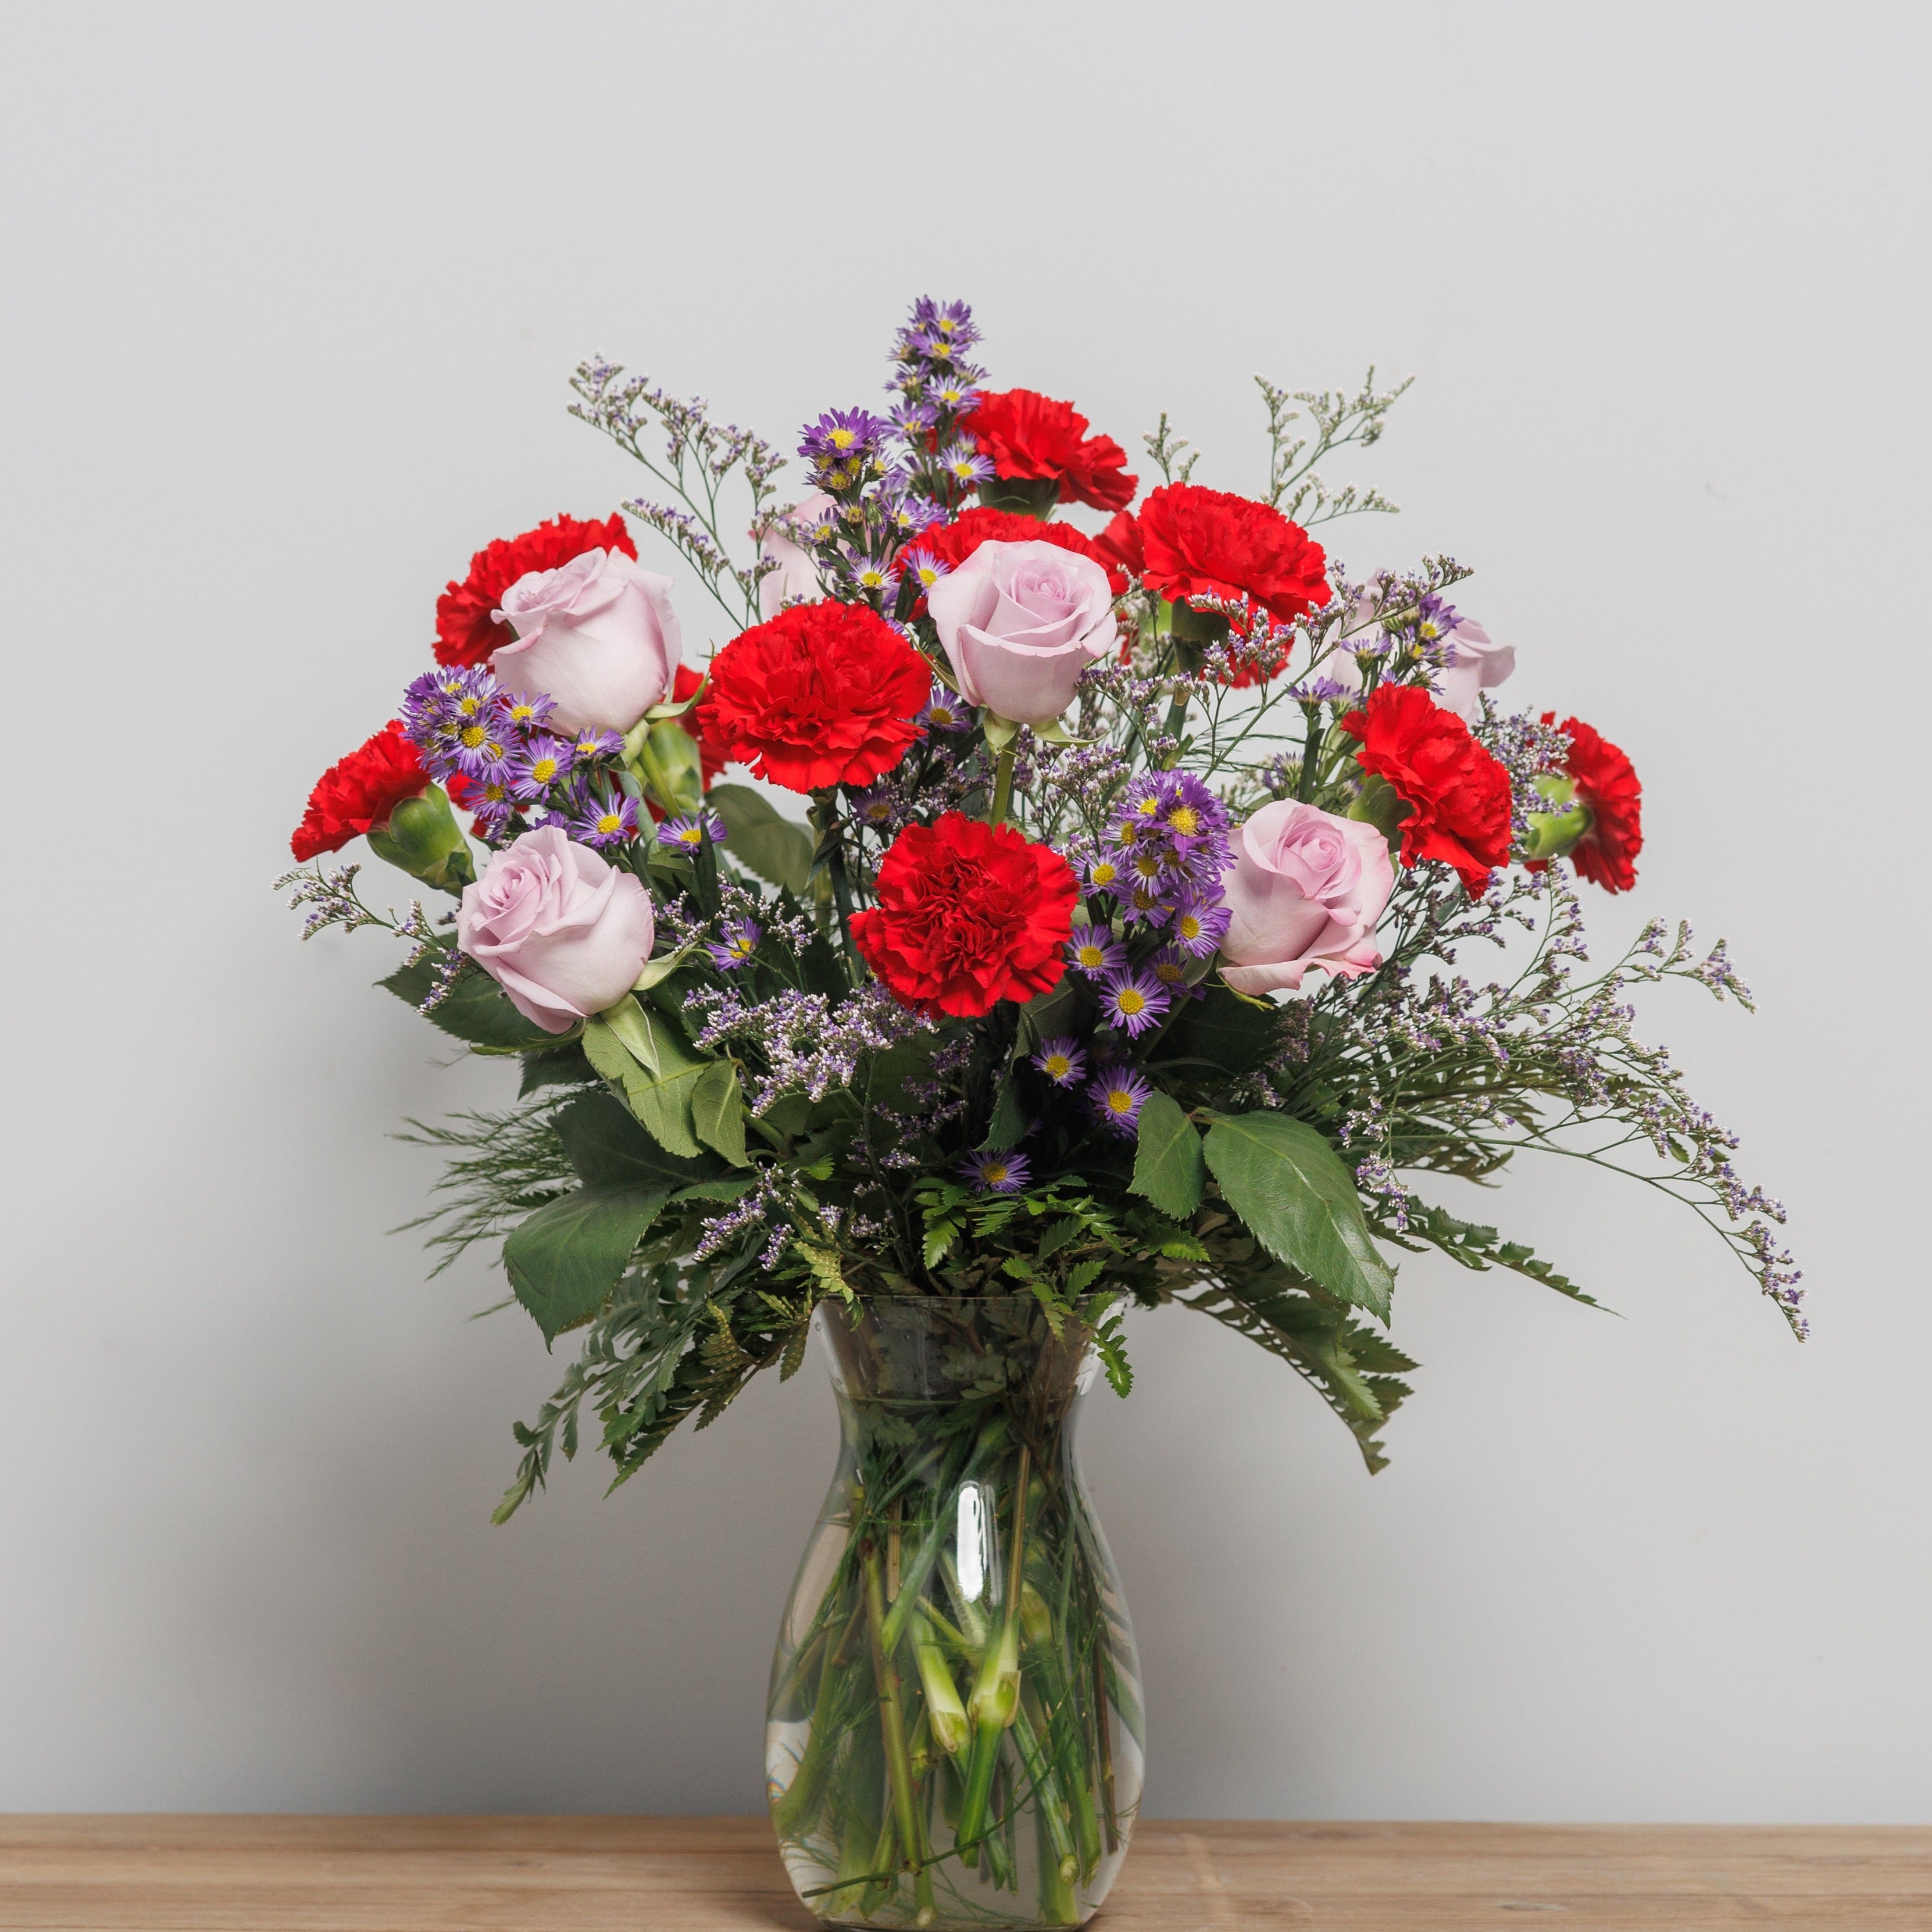 A vase arrangement with red carnations and lavender roses.